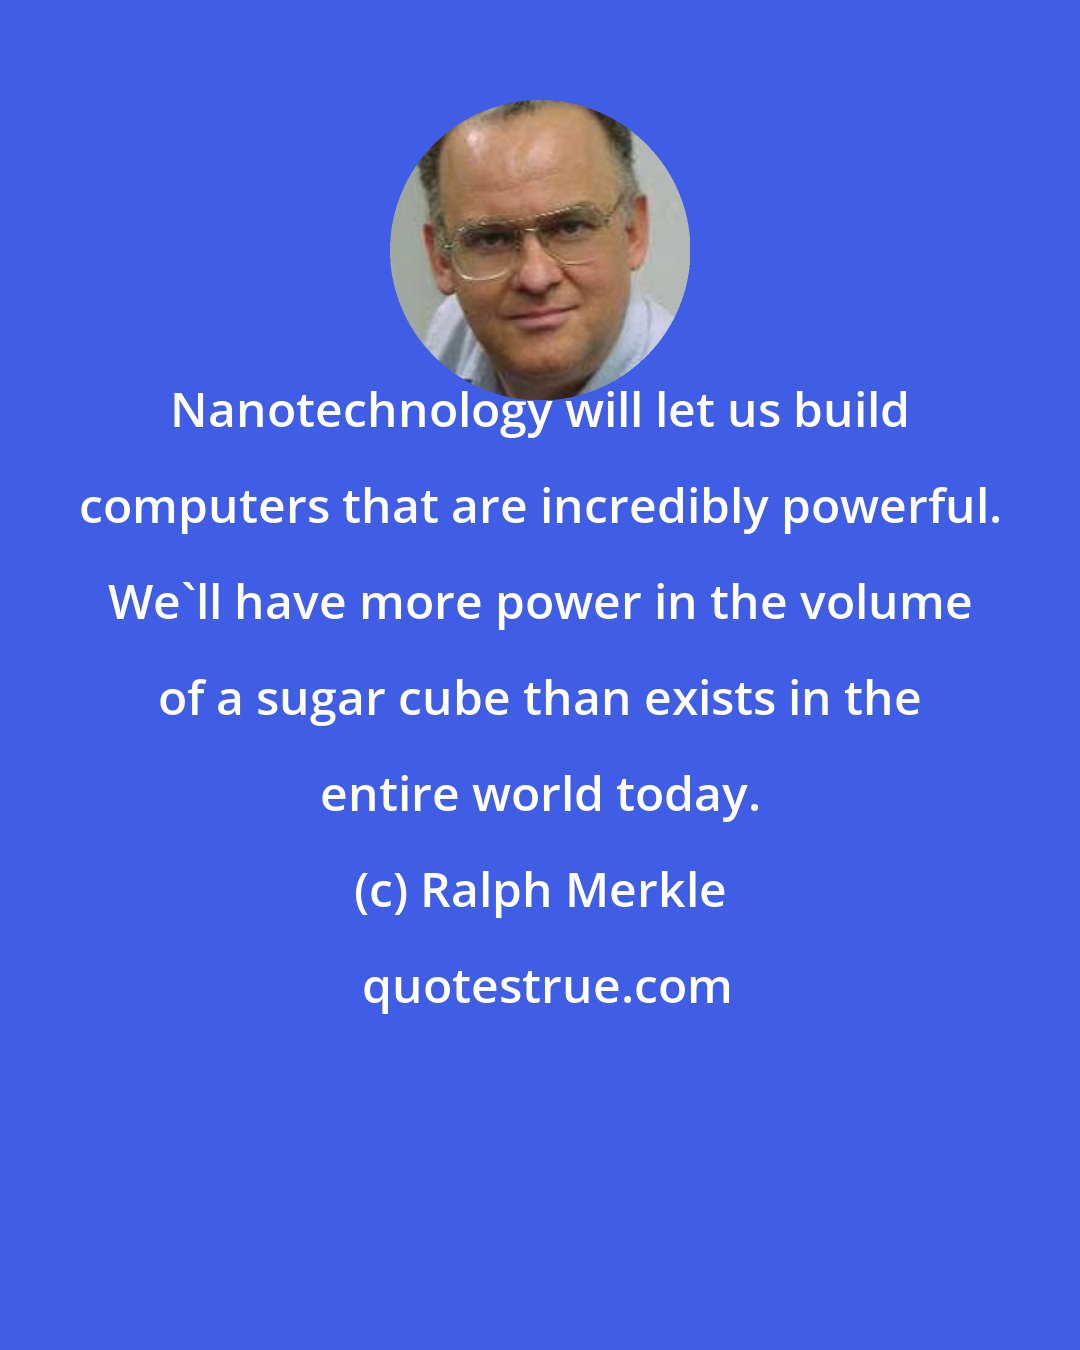 Ralph Merkle: Nanotechnology will let us build computers that are incredibly powerful. We'll have more power in the volume of a sugar cube than exists in the entire world today.